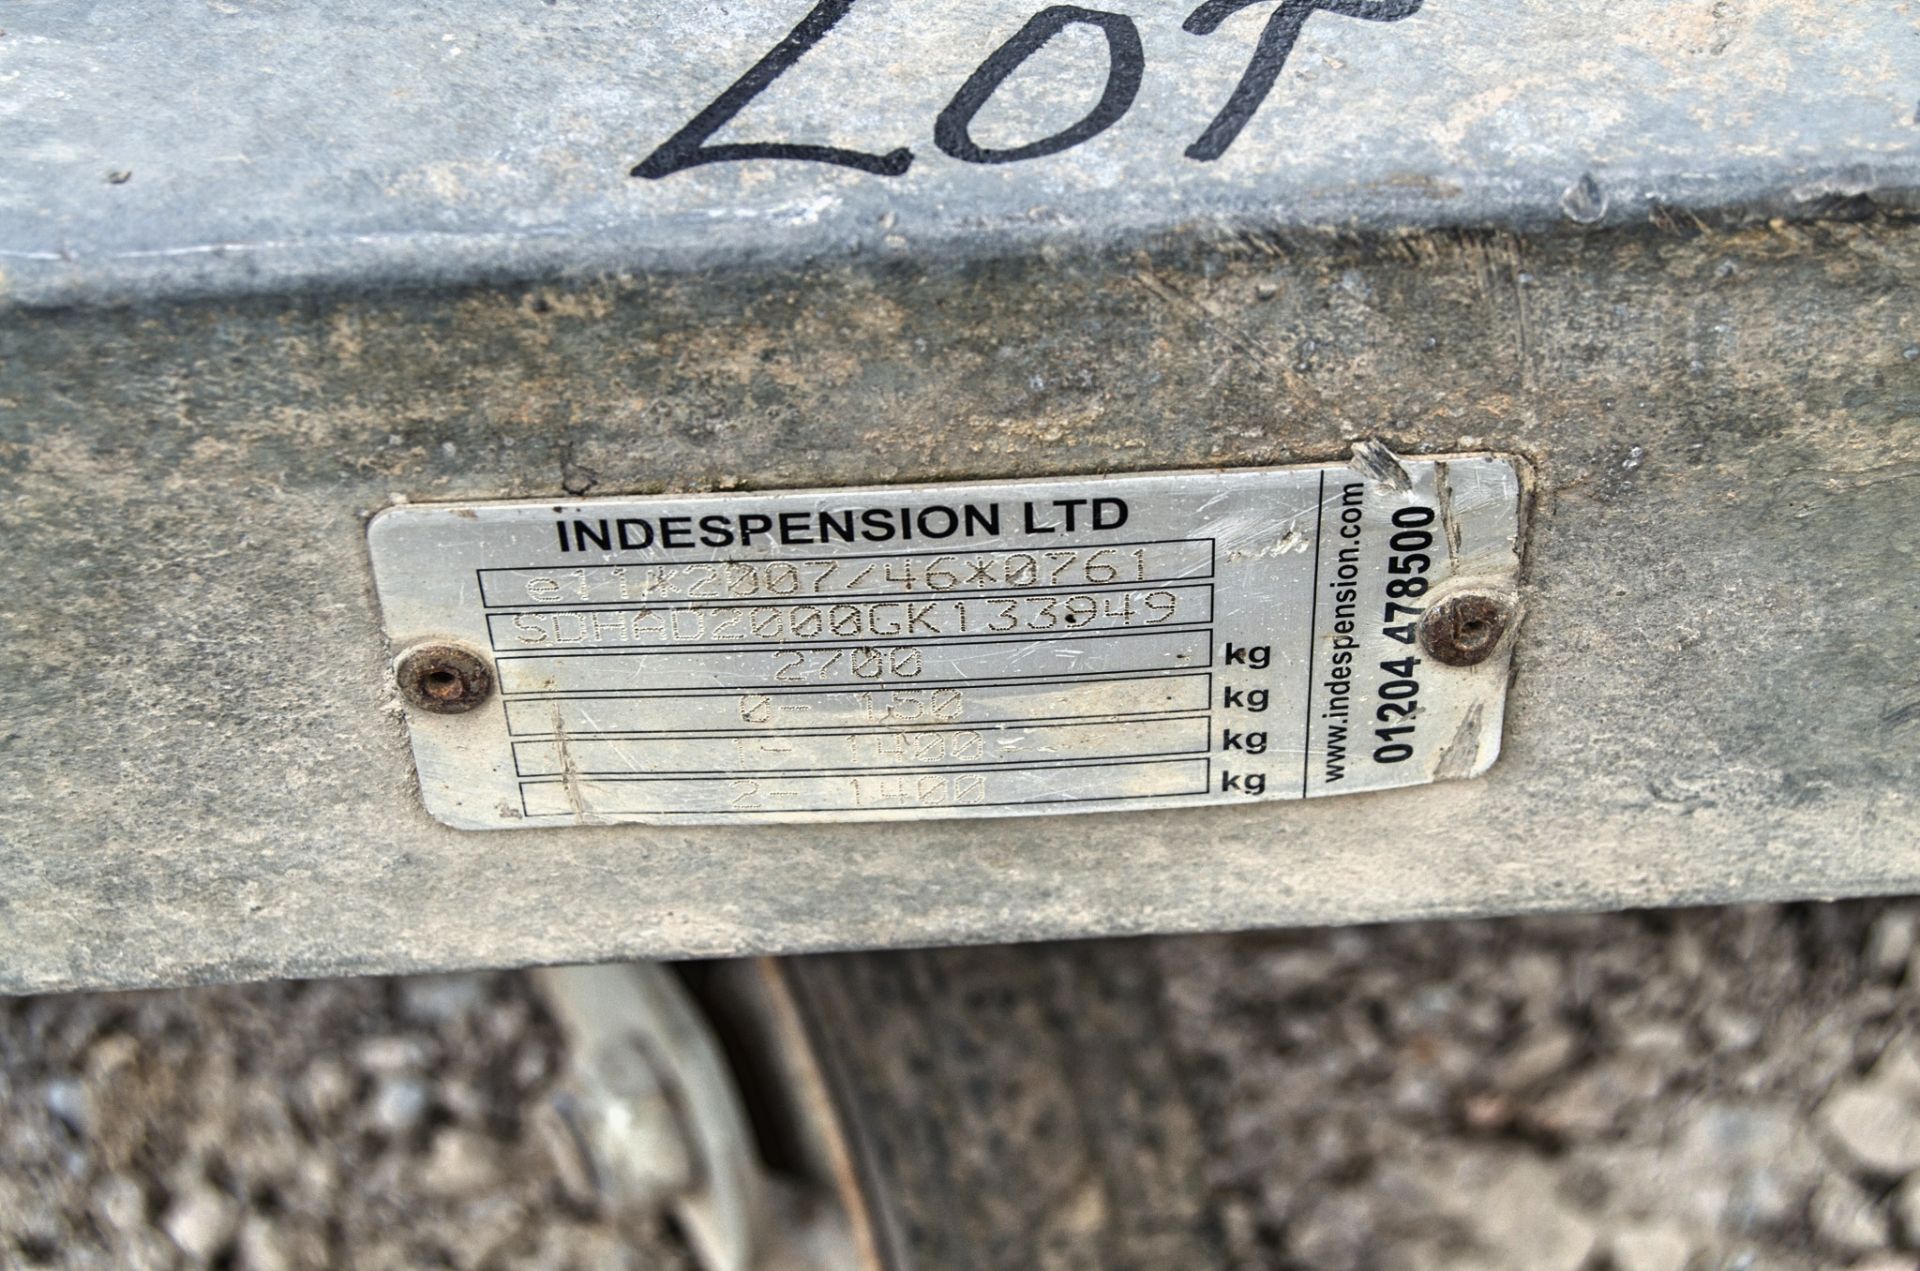 Indespension 8ft x 4ft tandem axle plant trailer S/N: 133949 A1098321 - Image 7 of 7